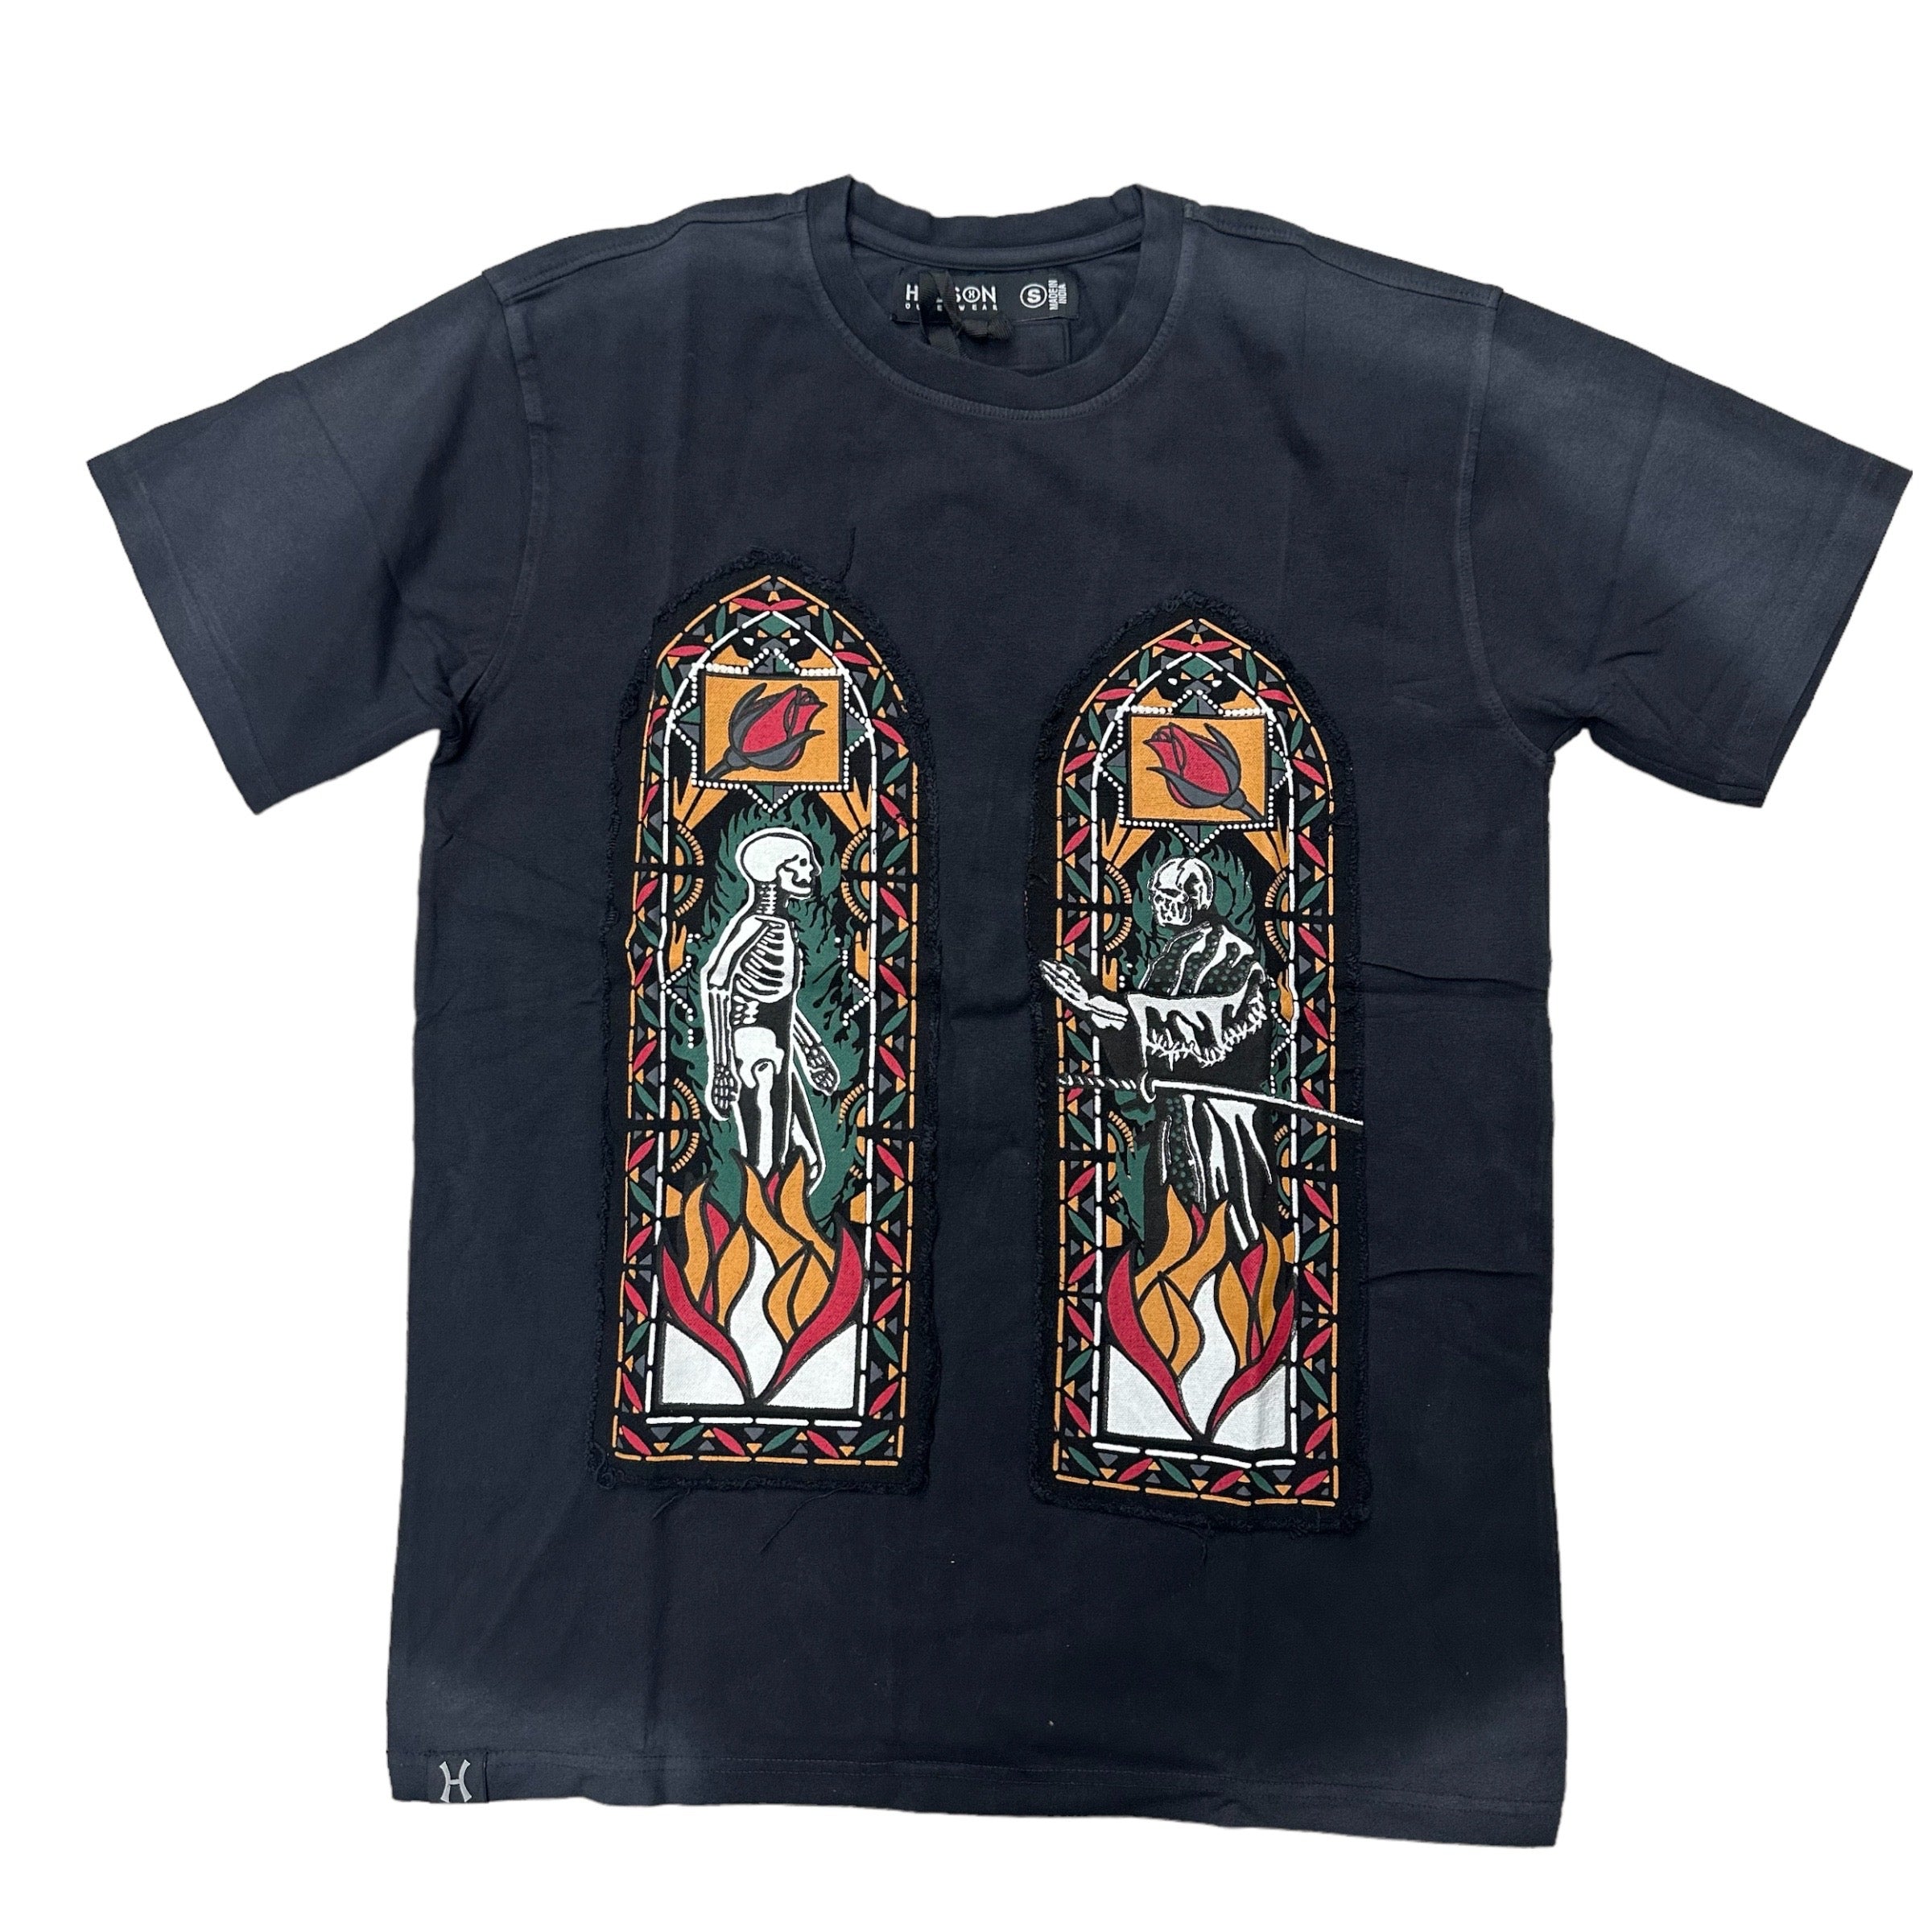 Hudson Stained Glass T-shirt Black